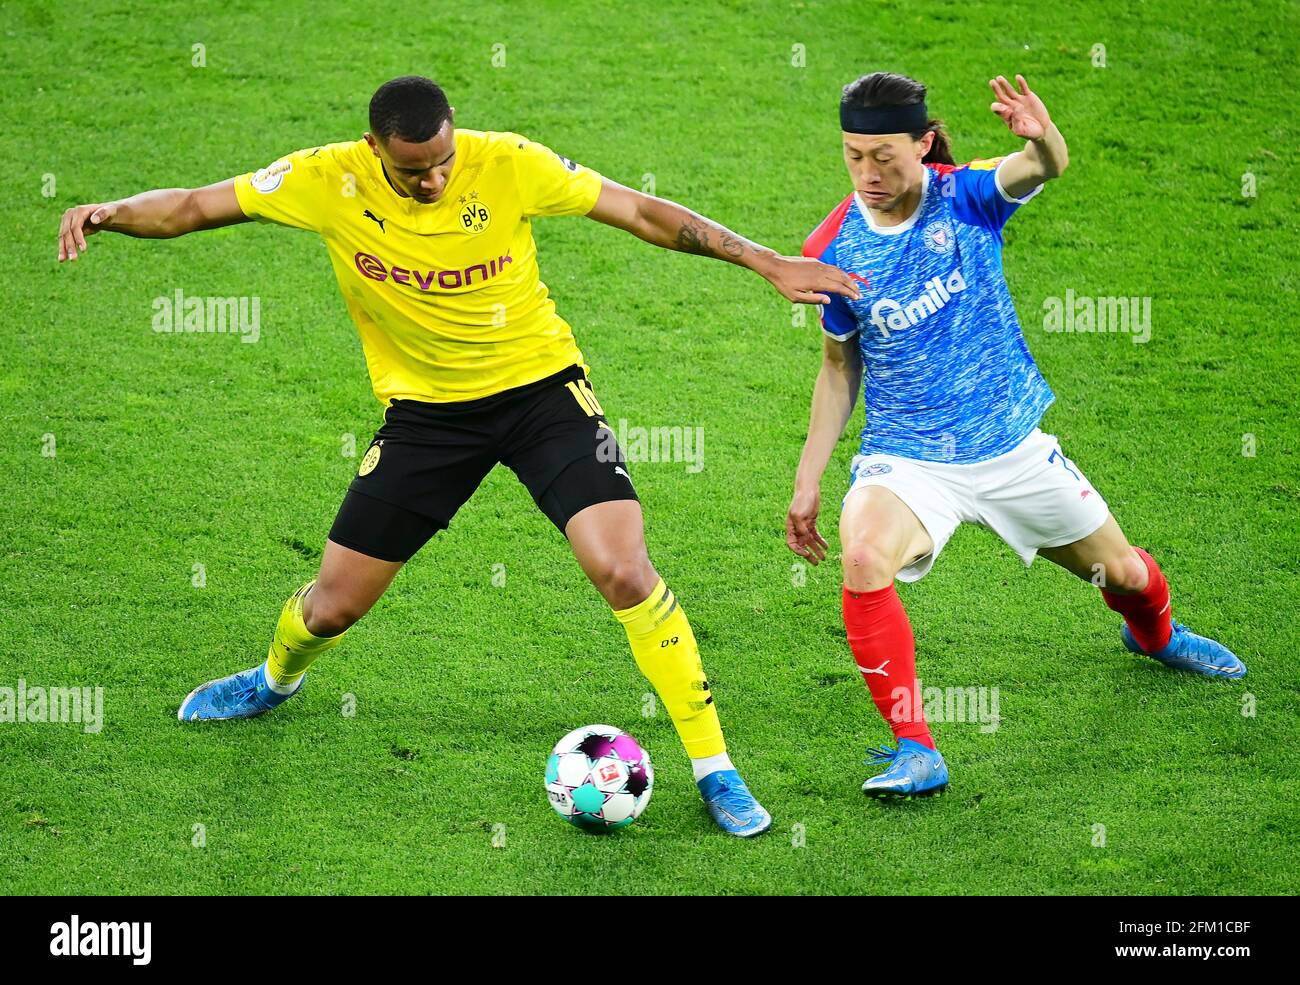 left to right Manuel AKANJI (DO) versus -Jae Sung LEE (KI), action, duels, football DFB Pokal, semifinals, Borussia Dortmund (DO) - Holstein Kiel (KI) 5: 0, on May 1st, 2021 in Dortmund/Germany . Photo: TimGroothuis/Witters/pool via Fotoagentur SVEN SIMON # DFB regulations prohibit any use of photographs as image sequences and/or quasi-video # Editorial Use ONLY # National and International News Agencies OUT | usage worldwide Stock Photo